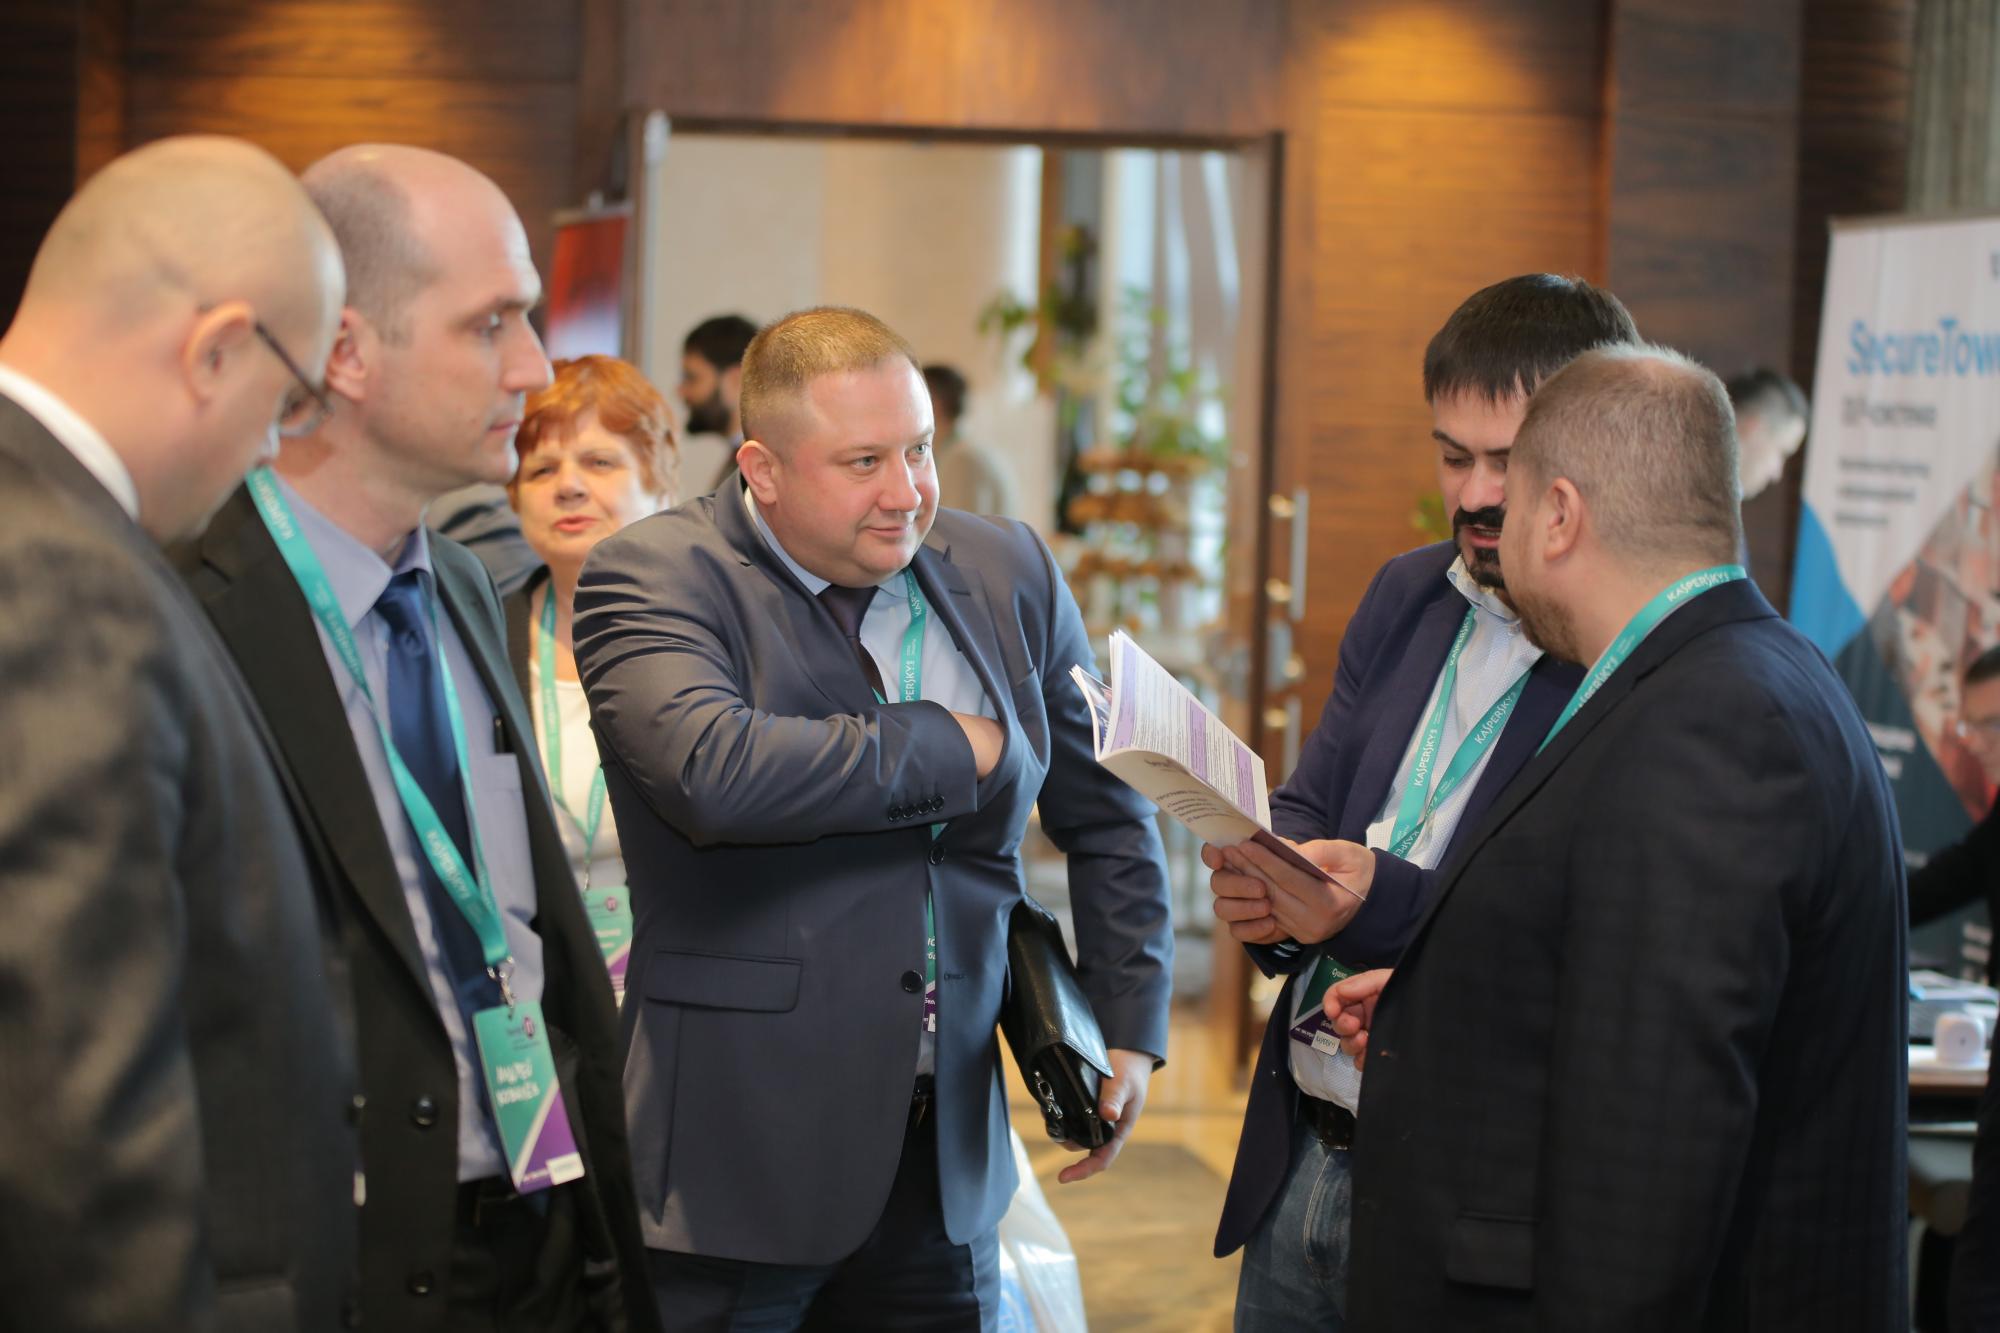 IT-Security Соnference 2019